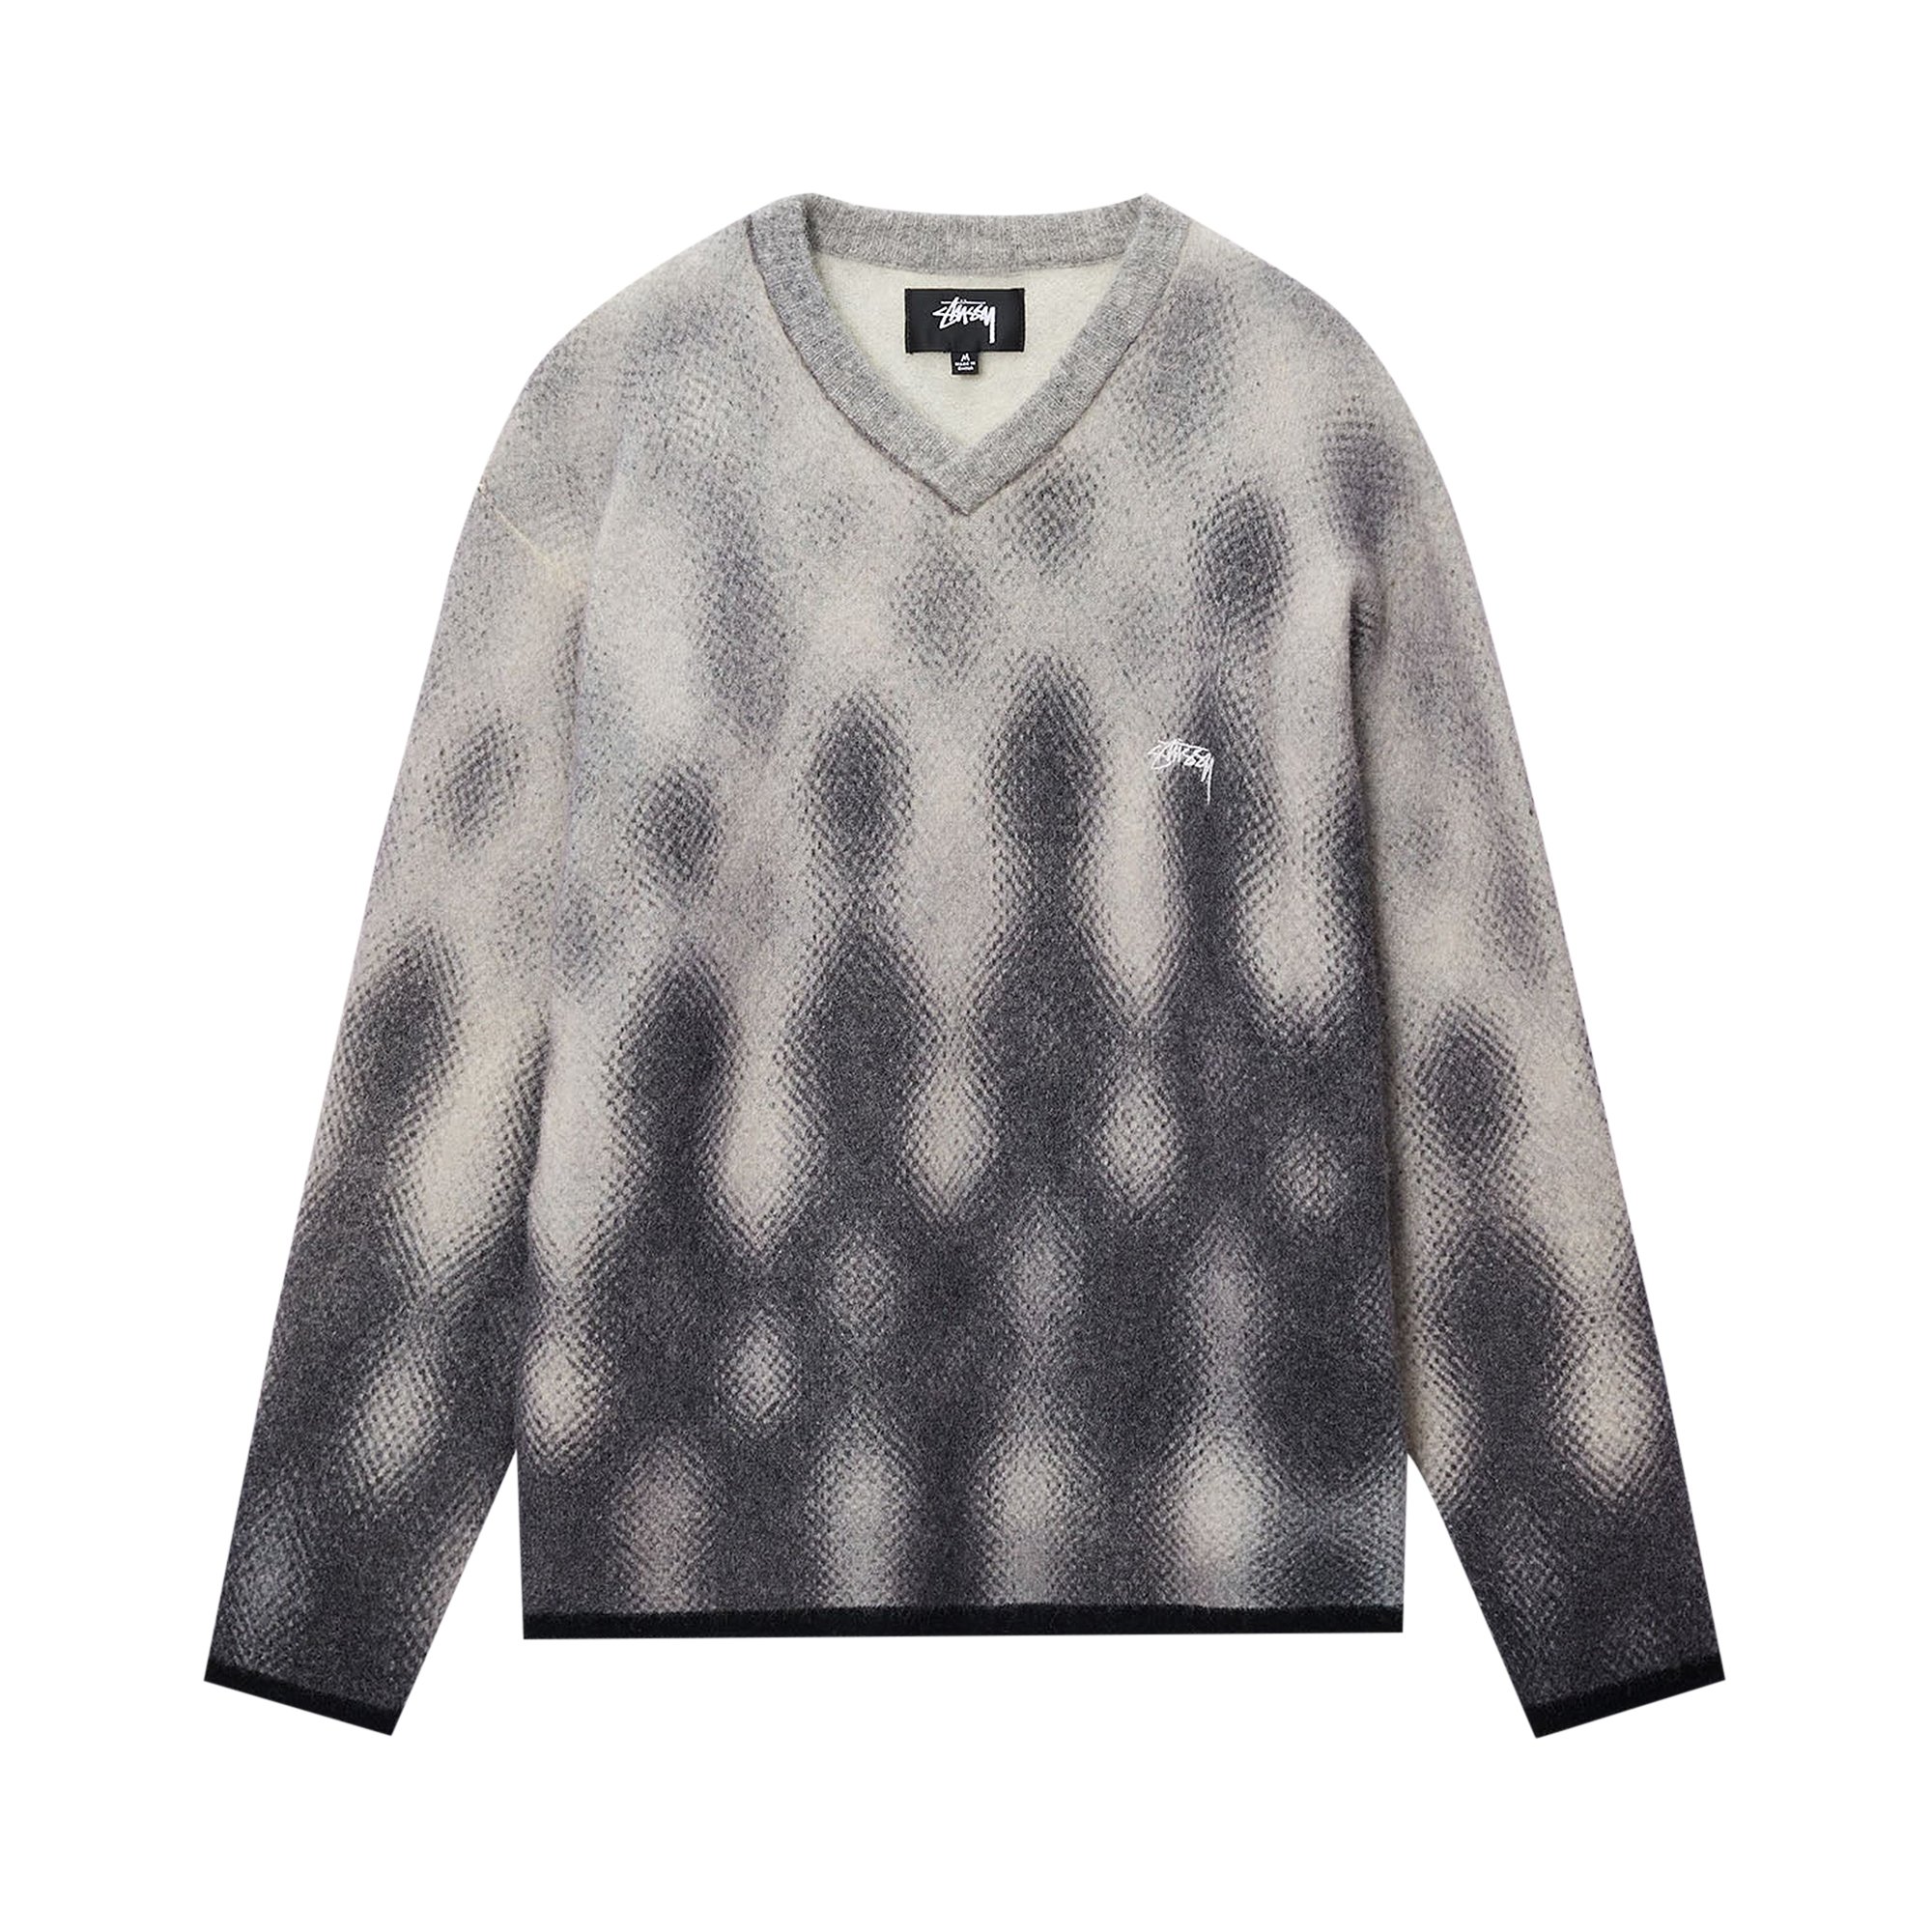 Stussy Gradient Dot Brushed Sweater 'Grey'